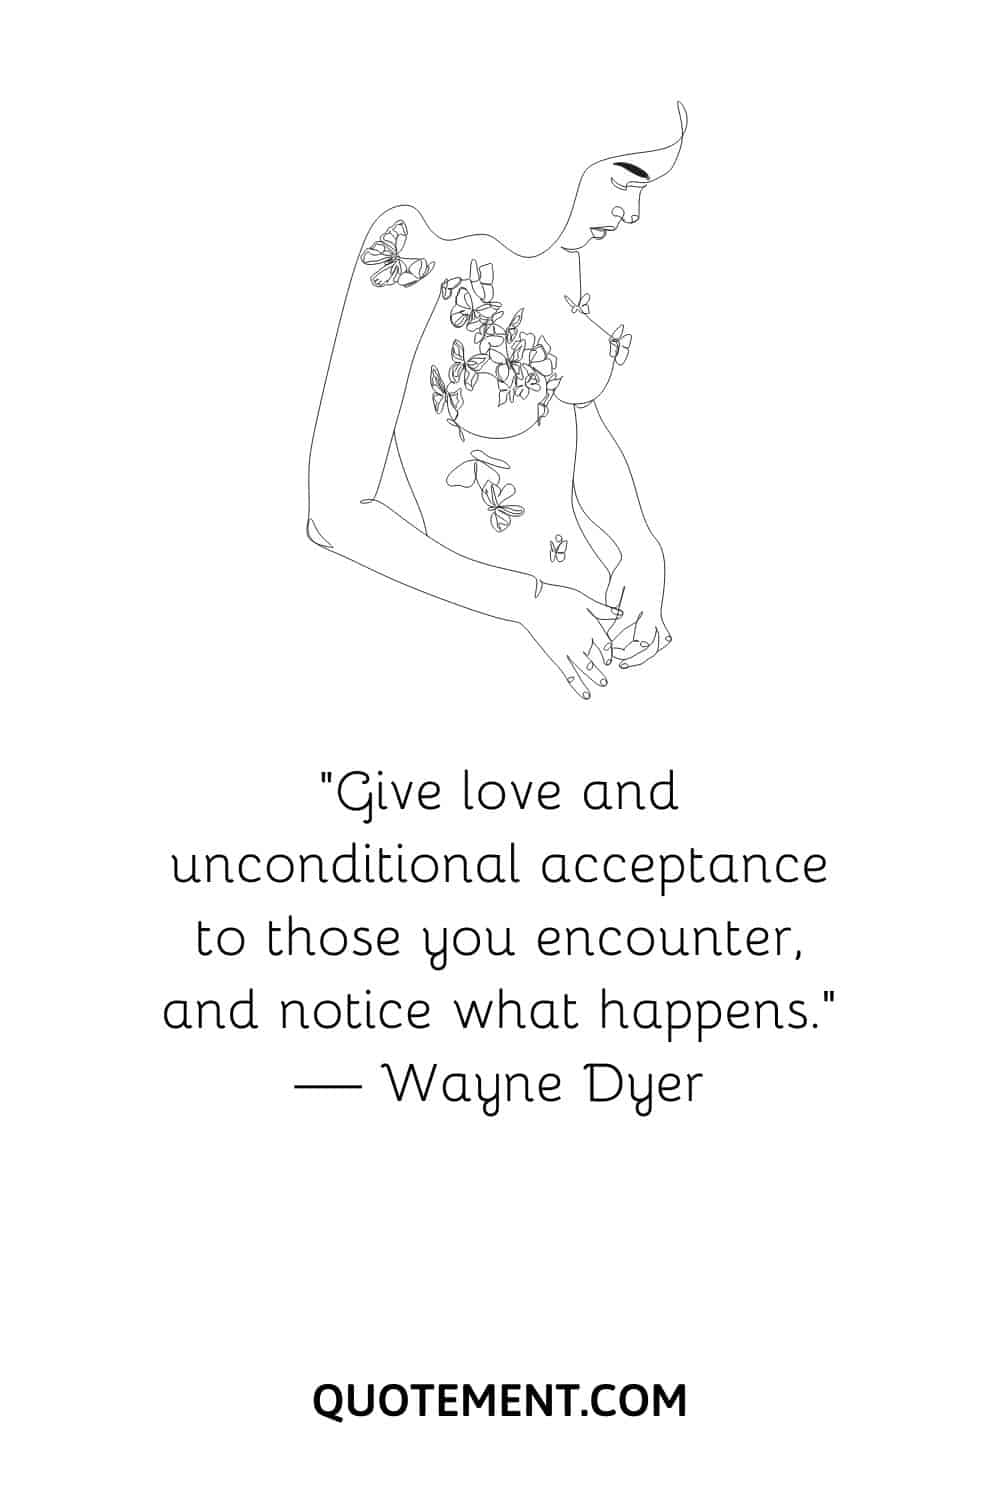 “Give love and unconditional acceptance to those you encounter, and notice what happens.” — Wayne Dyer